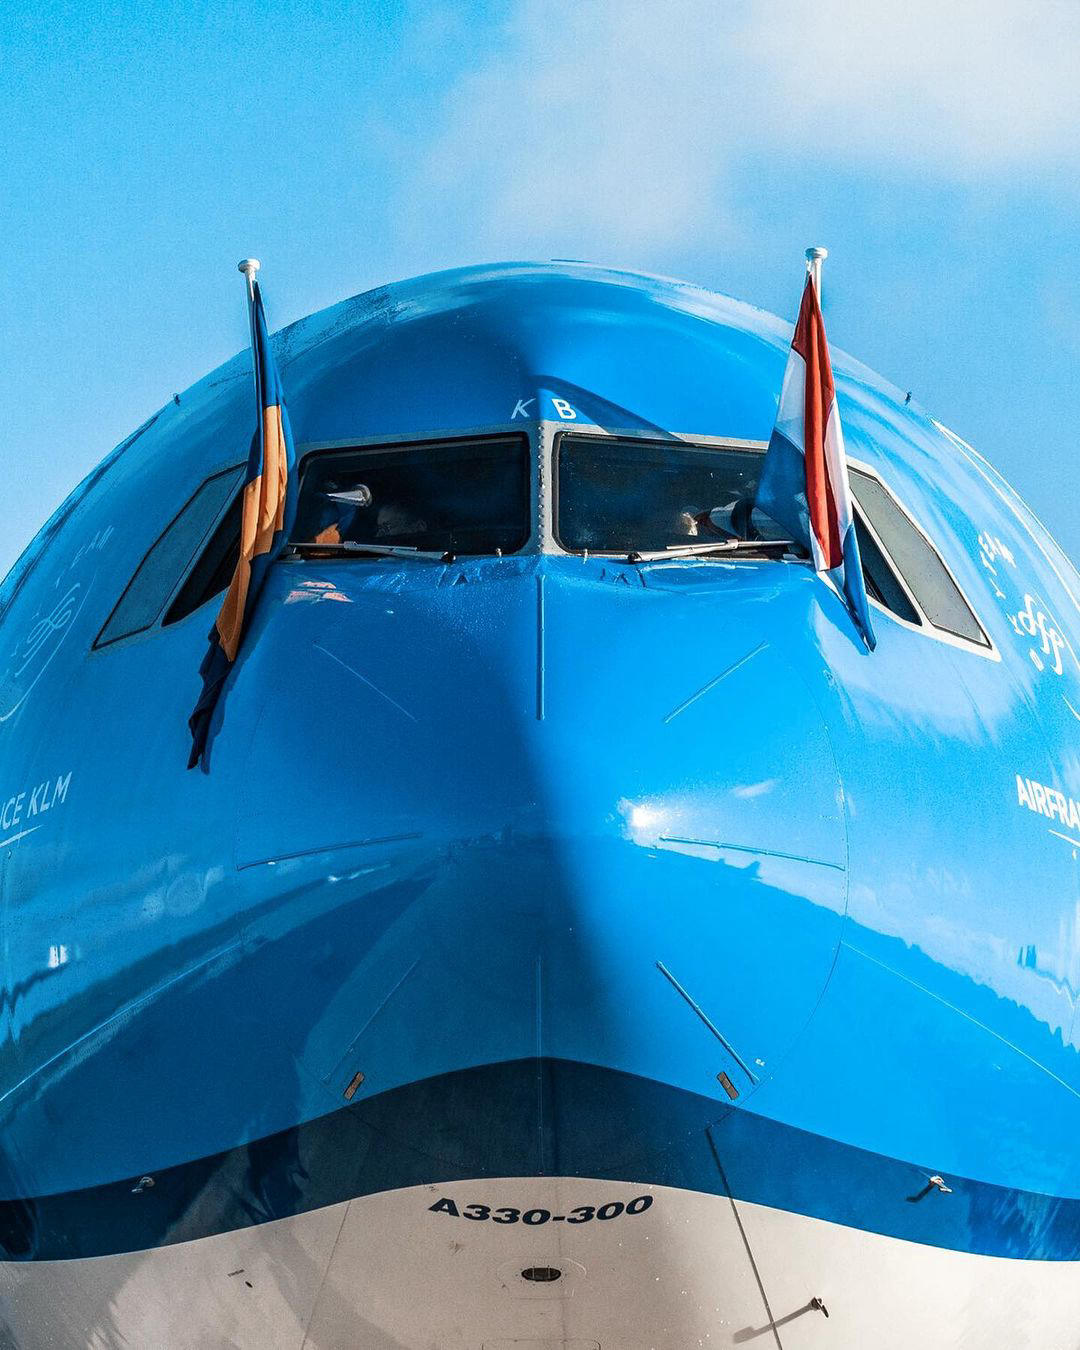 KLM Royal Dutch Airlines - One more quiz before the year is over